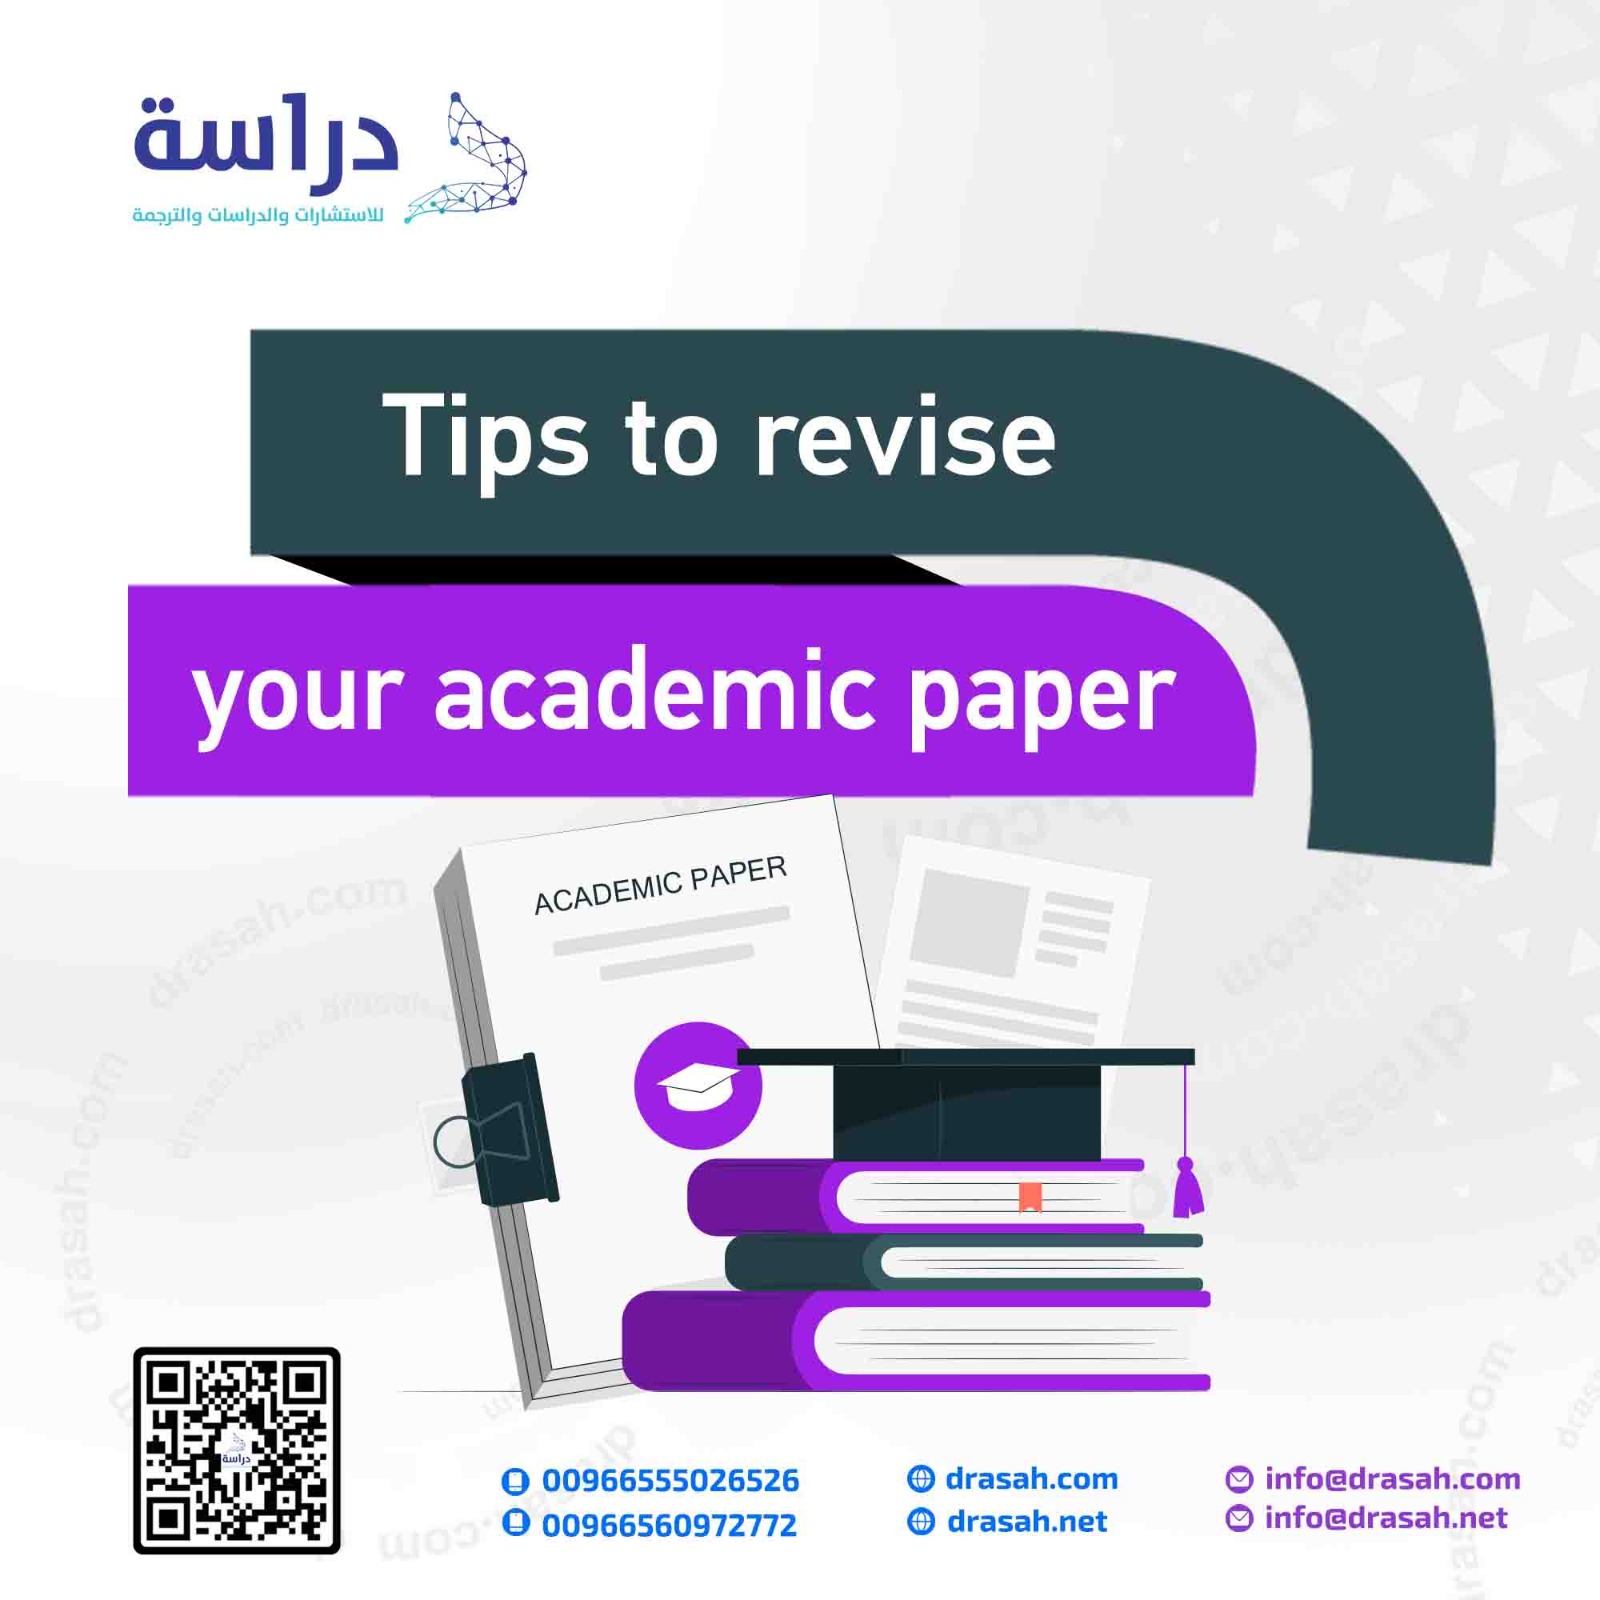 Tips to revise your academic paper